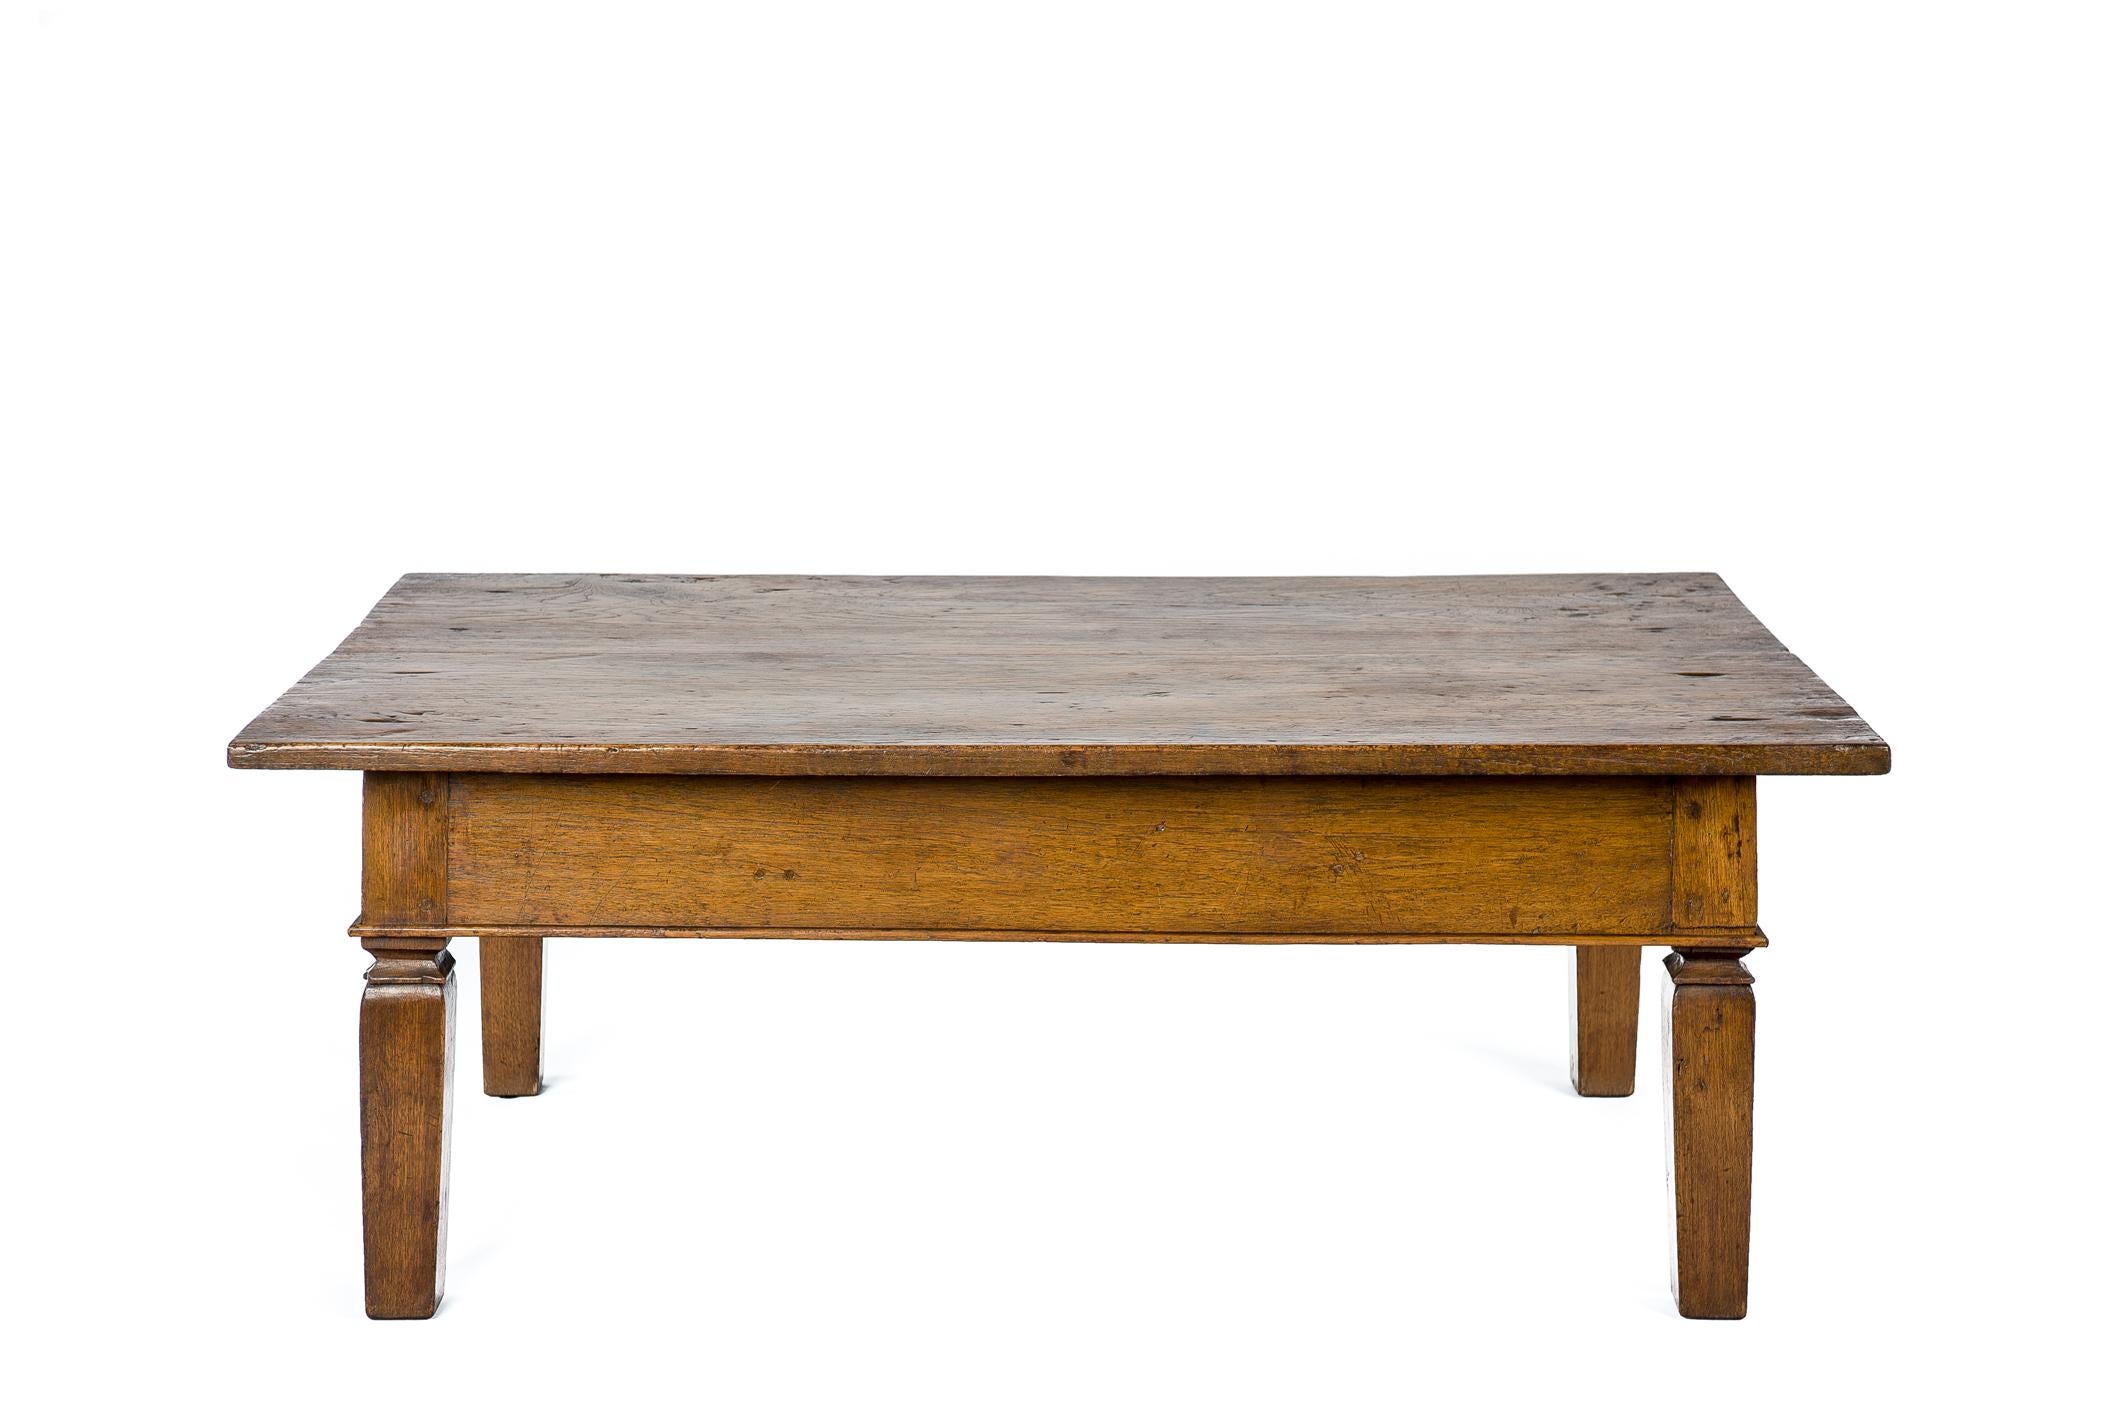 Dutch Colonial Antique 19th Century Dutch Teak Honey Color Coffee Table with Drawer For Sale